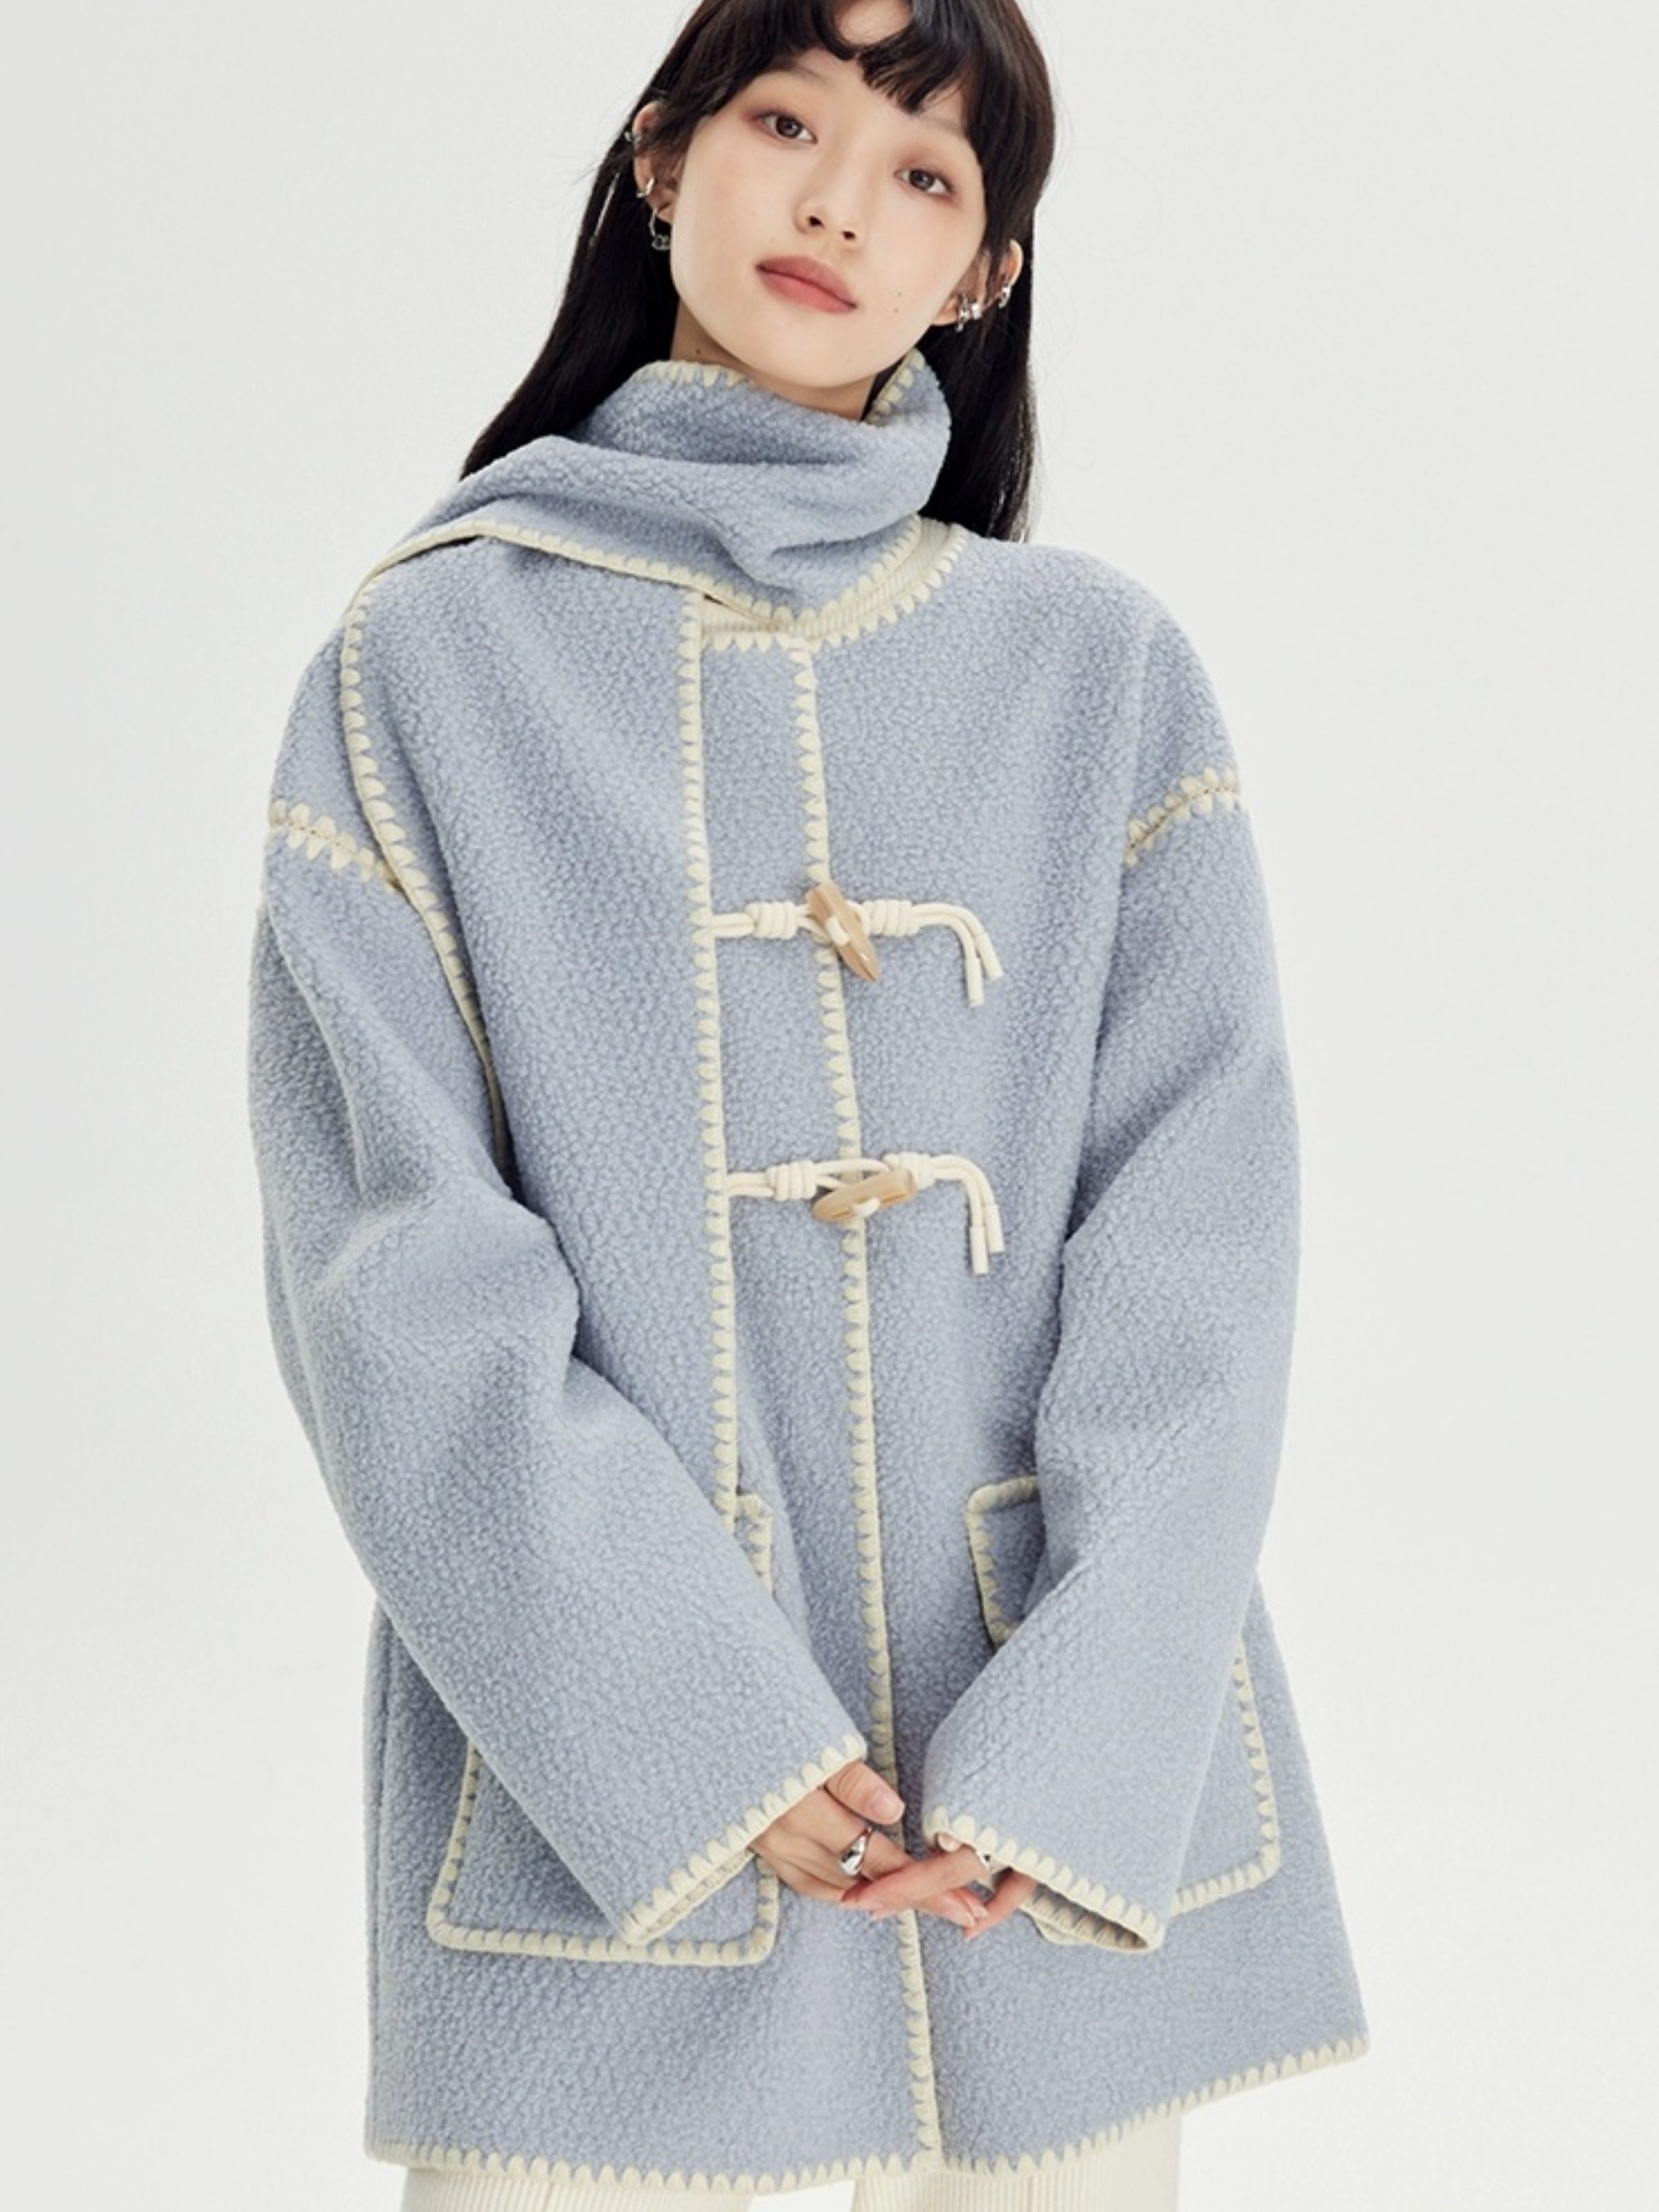 Stitched Horn Button Embroidered Coat - chiclara